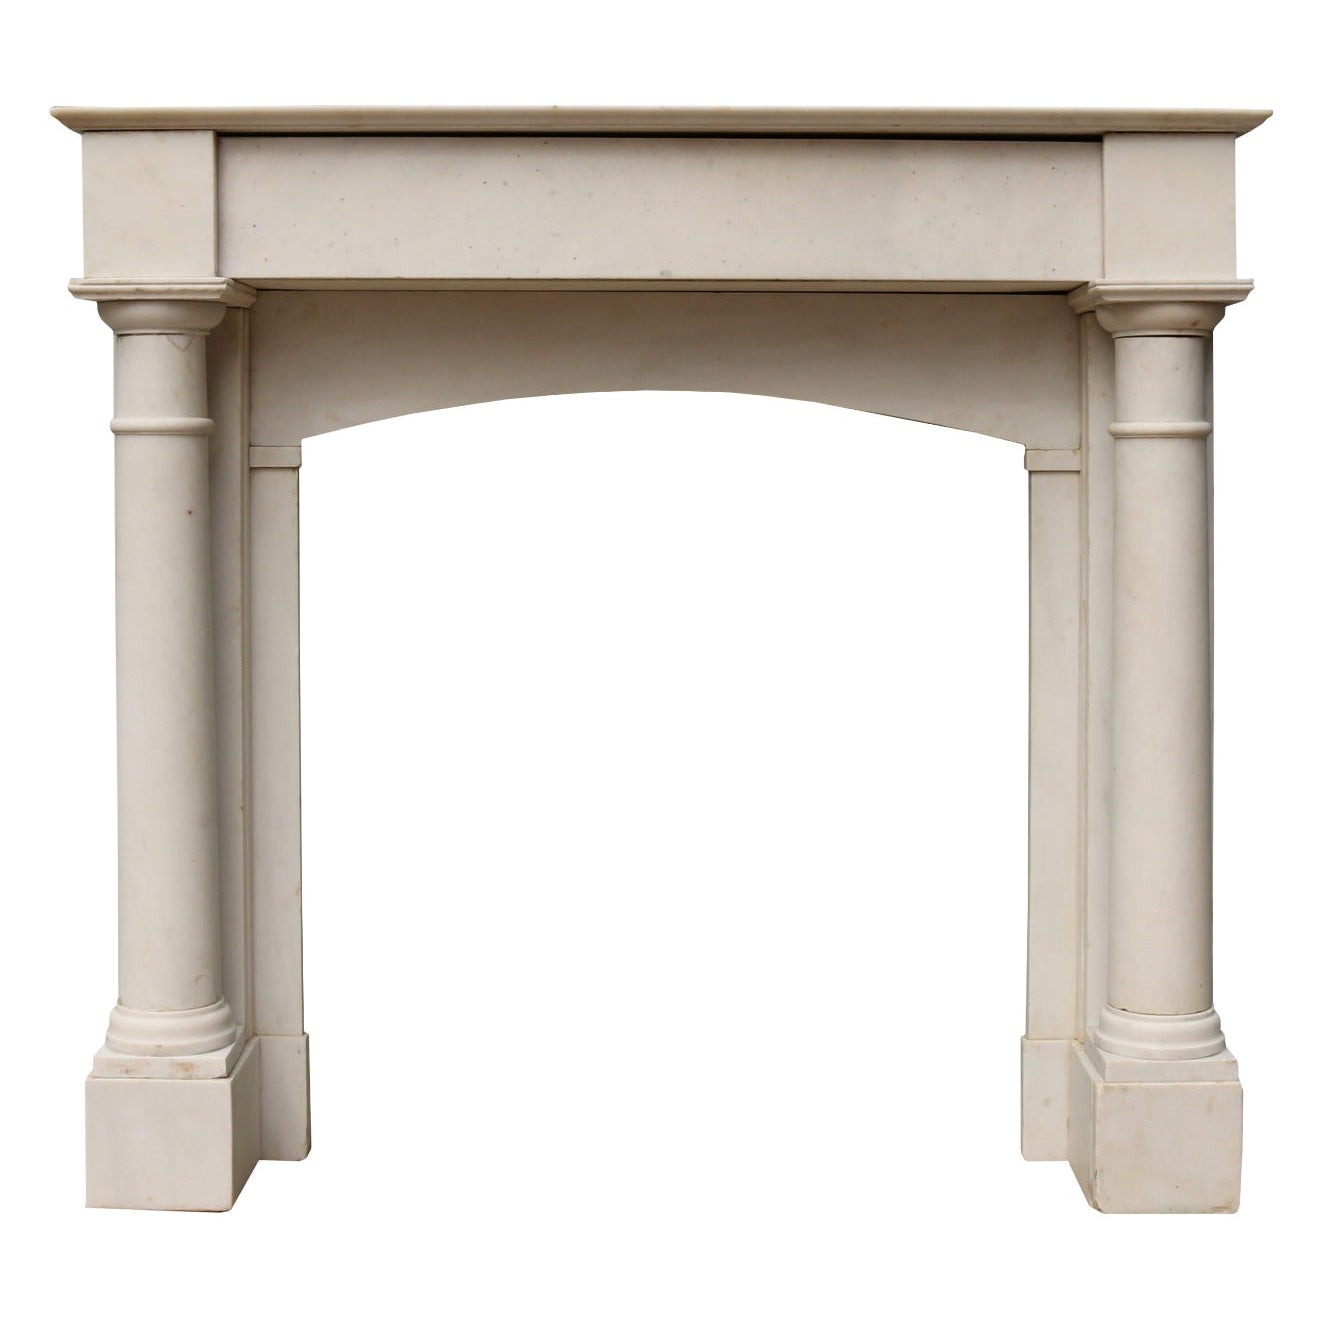 Antique White Statuary Marble Fire Mantel